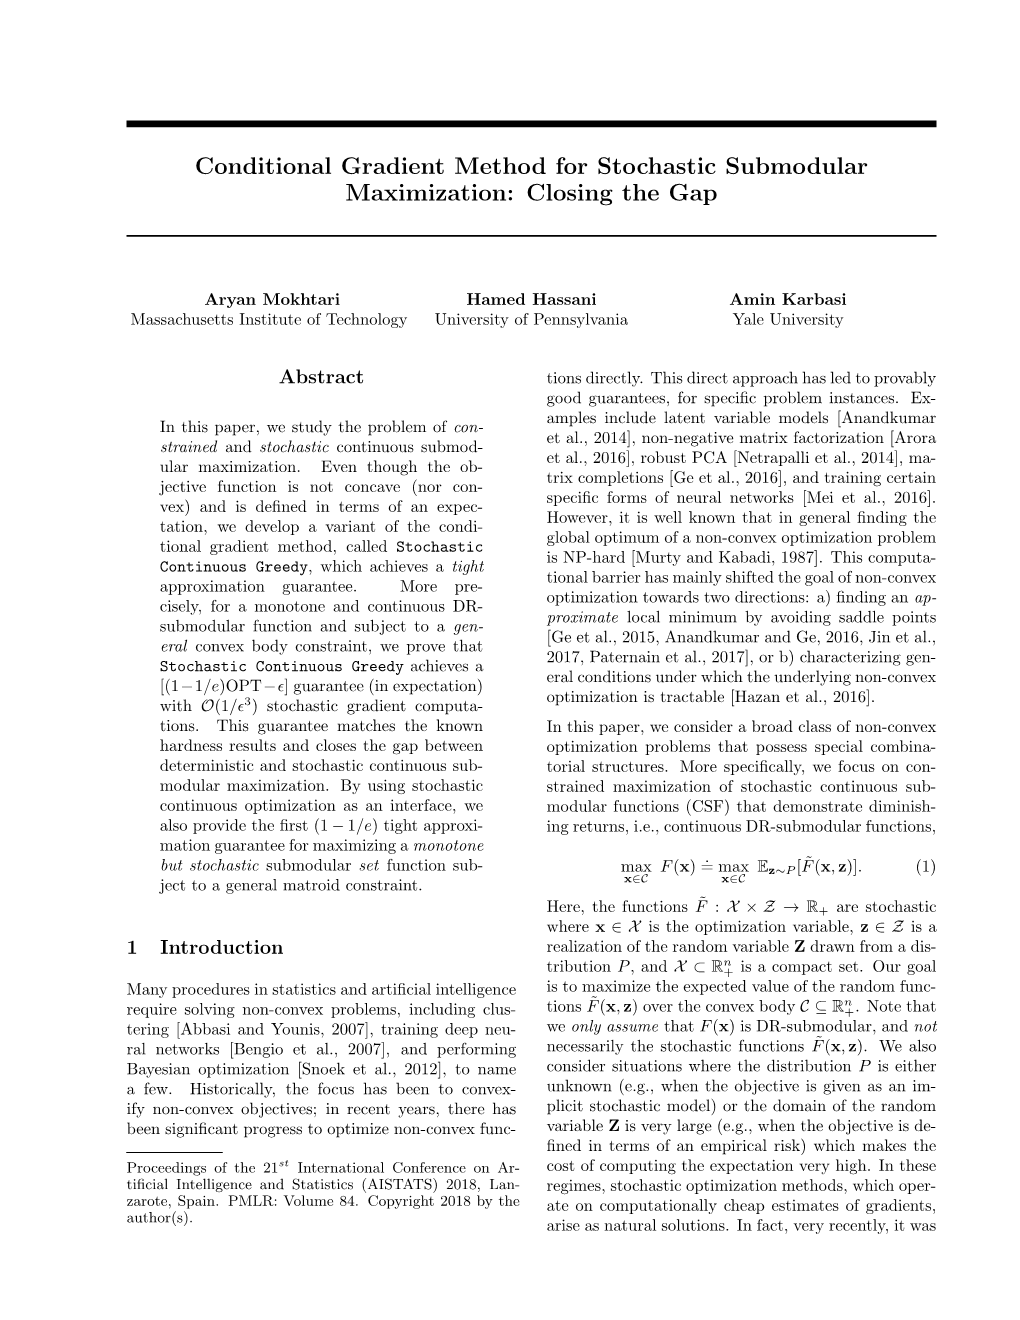 Conditional Gradient Method for Stochastic Submodular Maximization: Closing the Gap